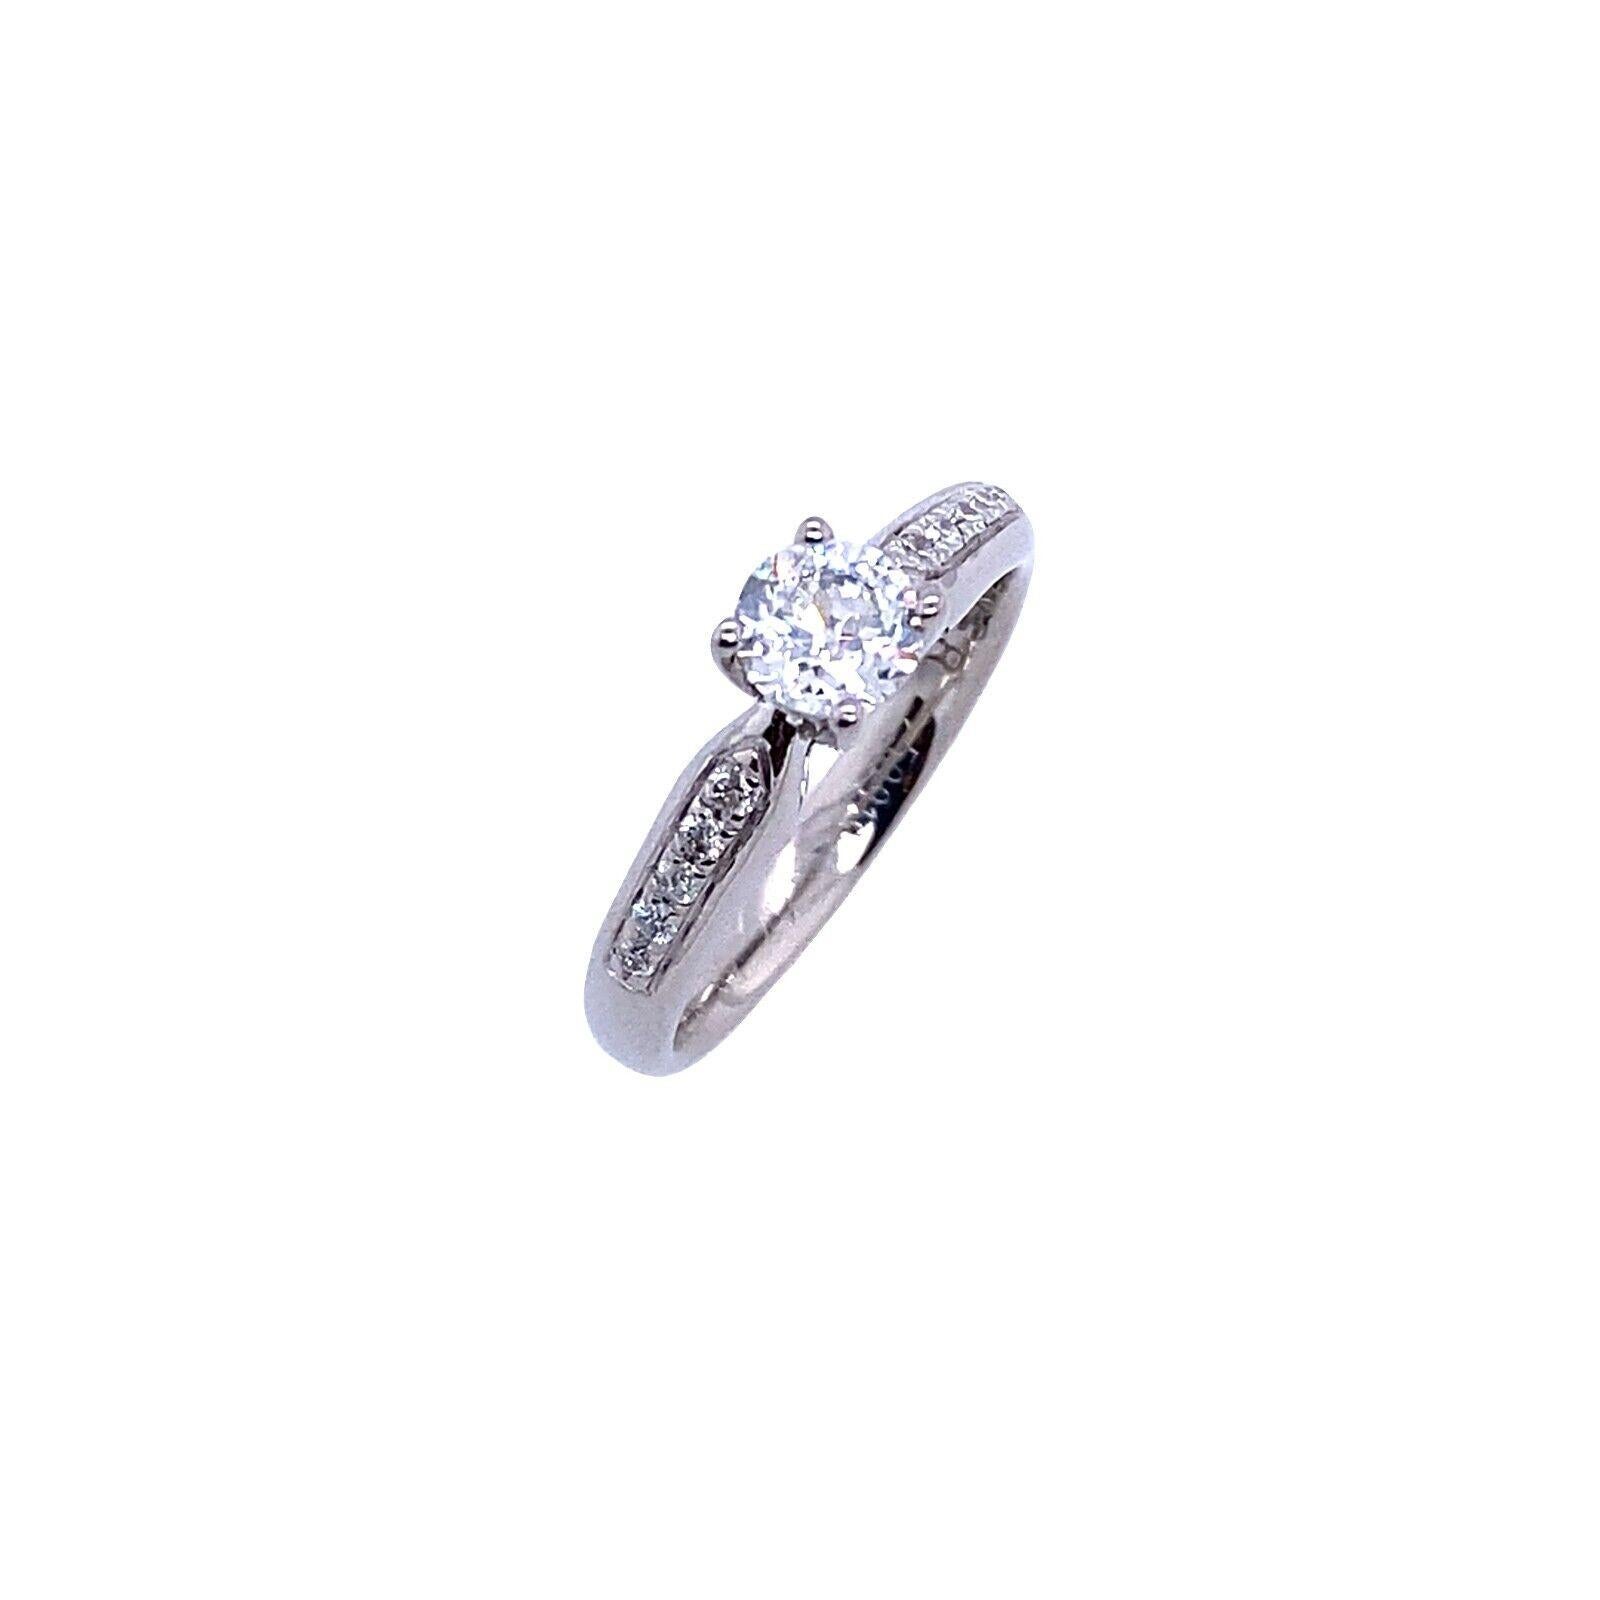 This Diamond engagement ring features a 0.47ct Round Brilliant Diamond set in a Platinum. The Diamond is accompanied by 0.03ct on the shoulders of the ring. The ring is certified by GSI

Additional Information:
Total Diamond Weight: 0.50ct
Diamond